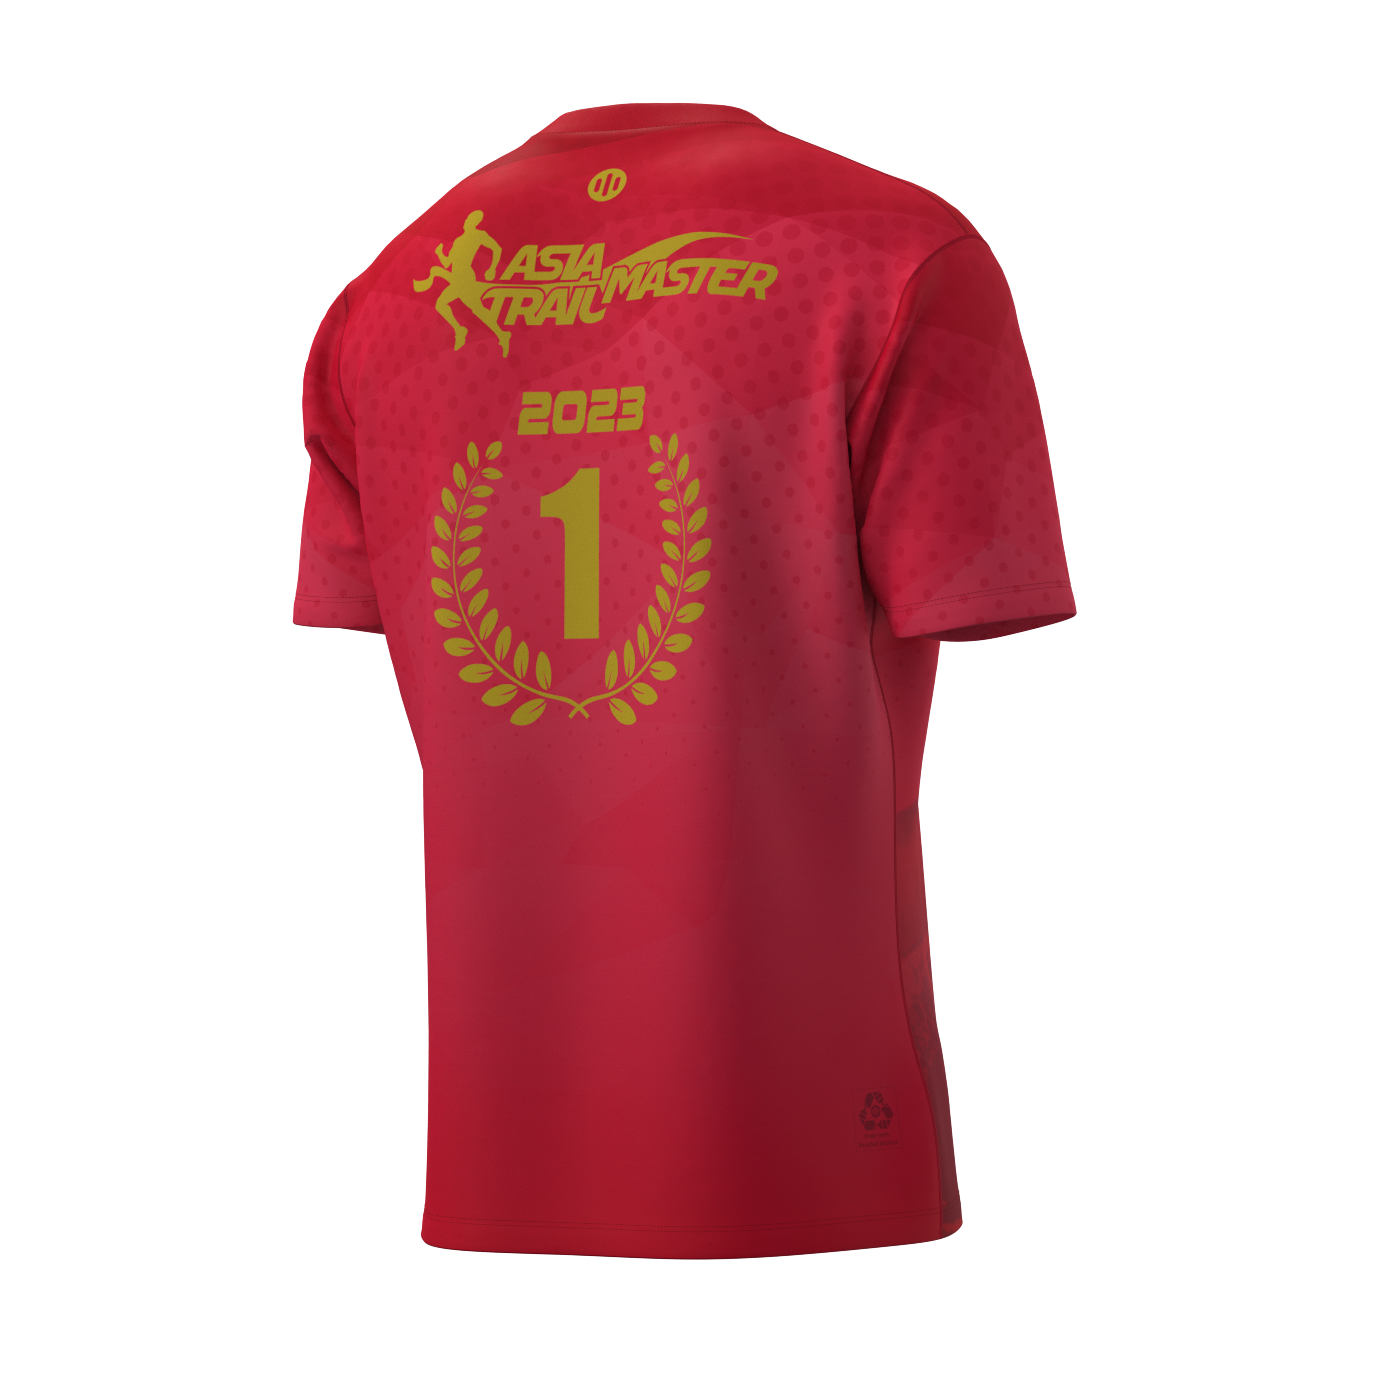 ATM Final - Tee - Champion back.png